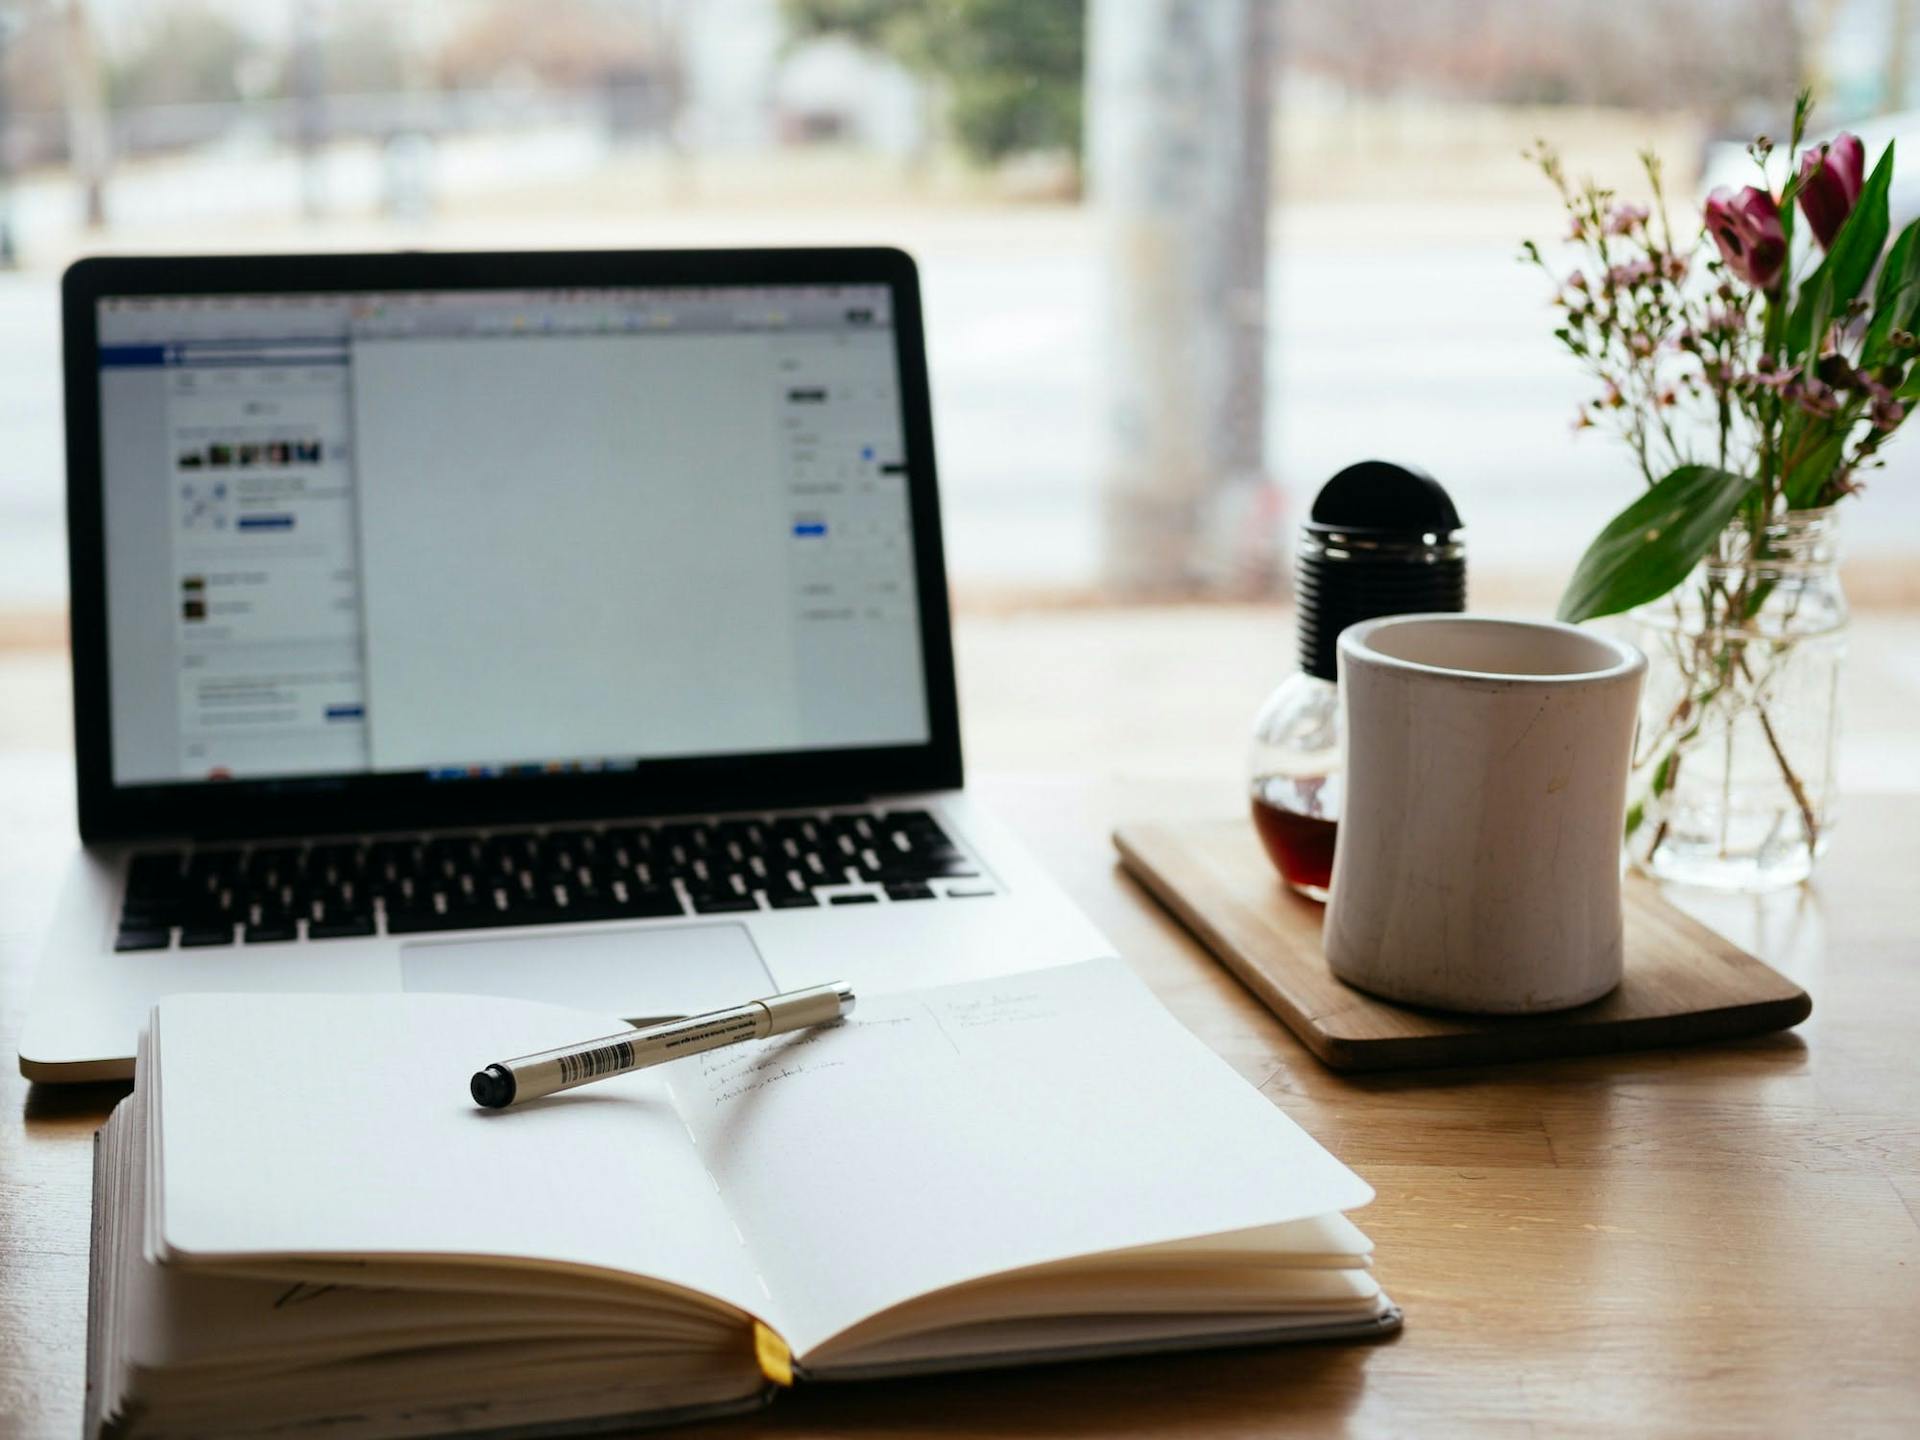 Open notebook on a desk in front of a laptop. Tips for writing the perfect press release.